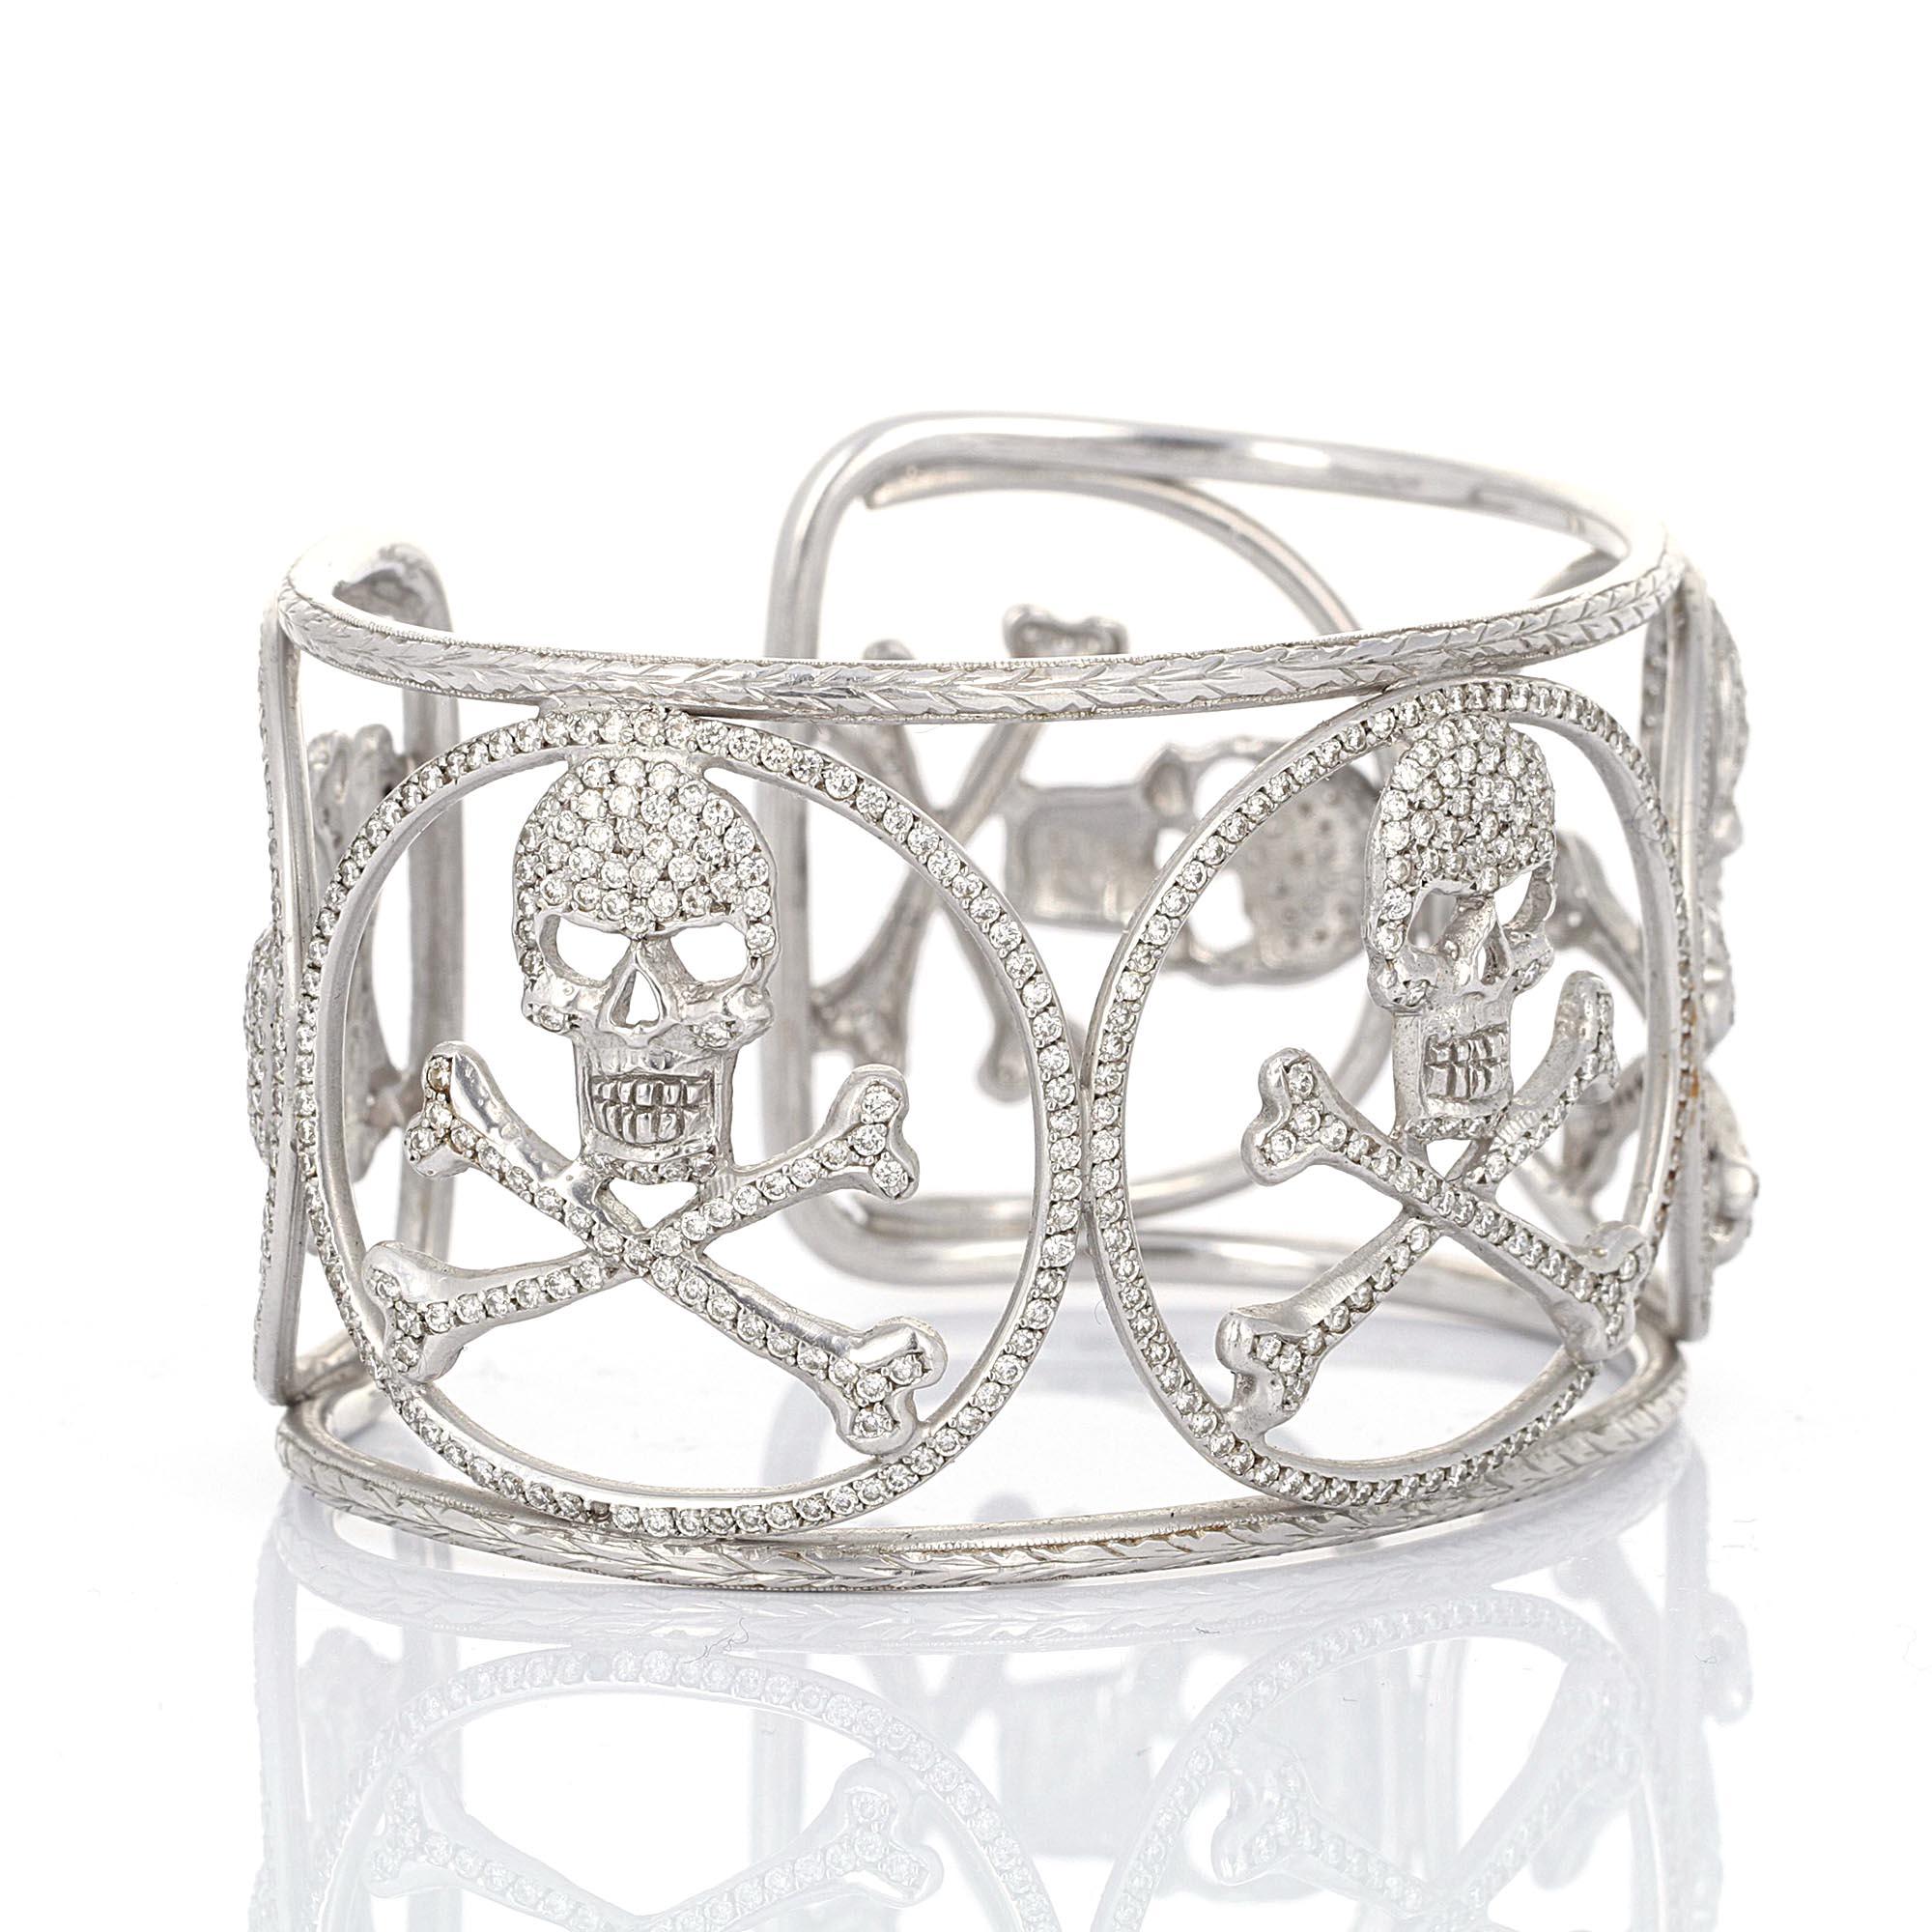 Loree Rodkin, 18 karat white gold 8 carat diamond skull cuff . There are 778 round brilliant white diamonds weighing an estimated 8.00 carats total.  The diamonds average G-H, VS1-VS2.
The bangle cuff size is 6 1/2 inches. The diameter of the bangle